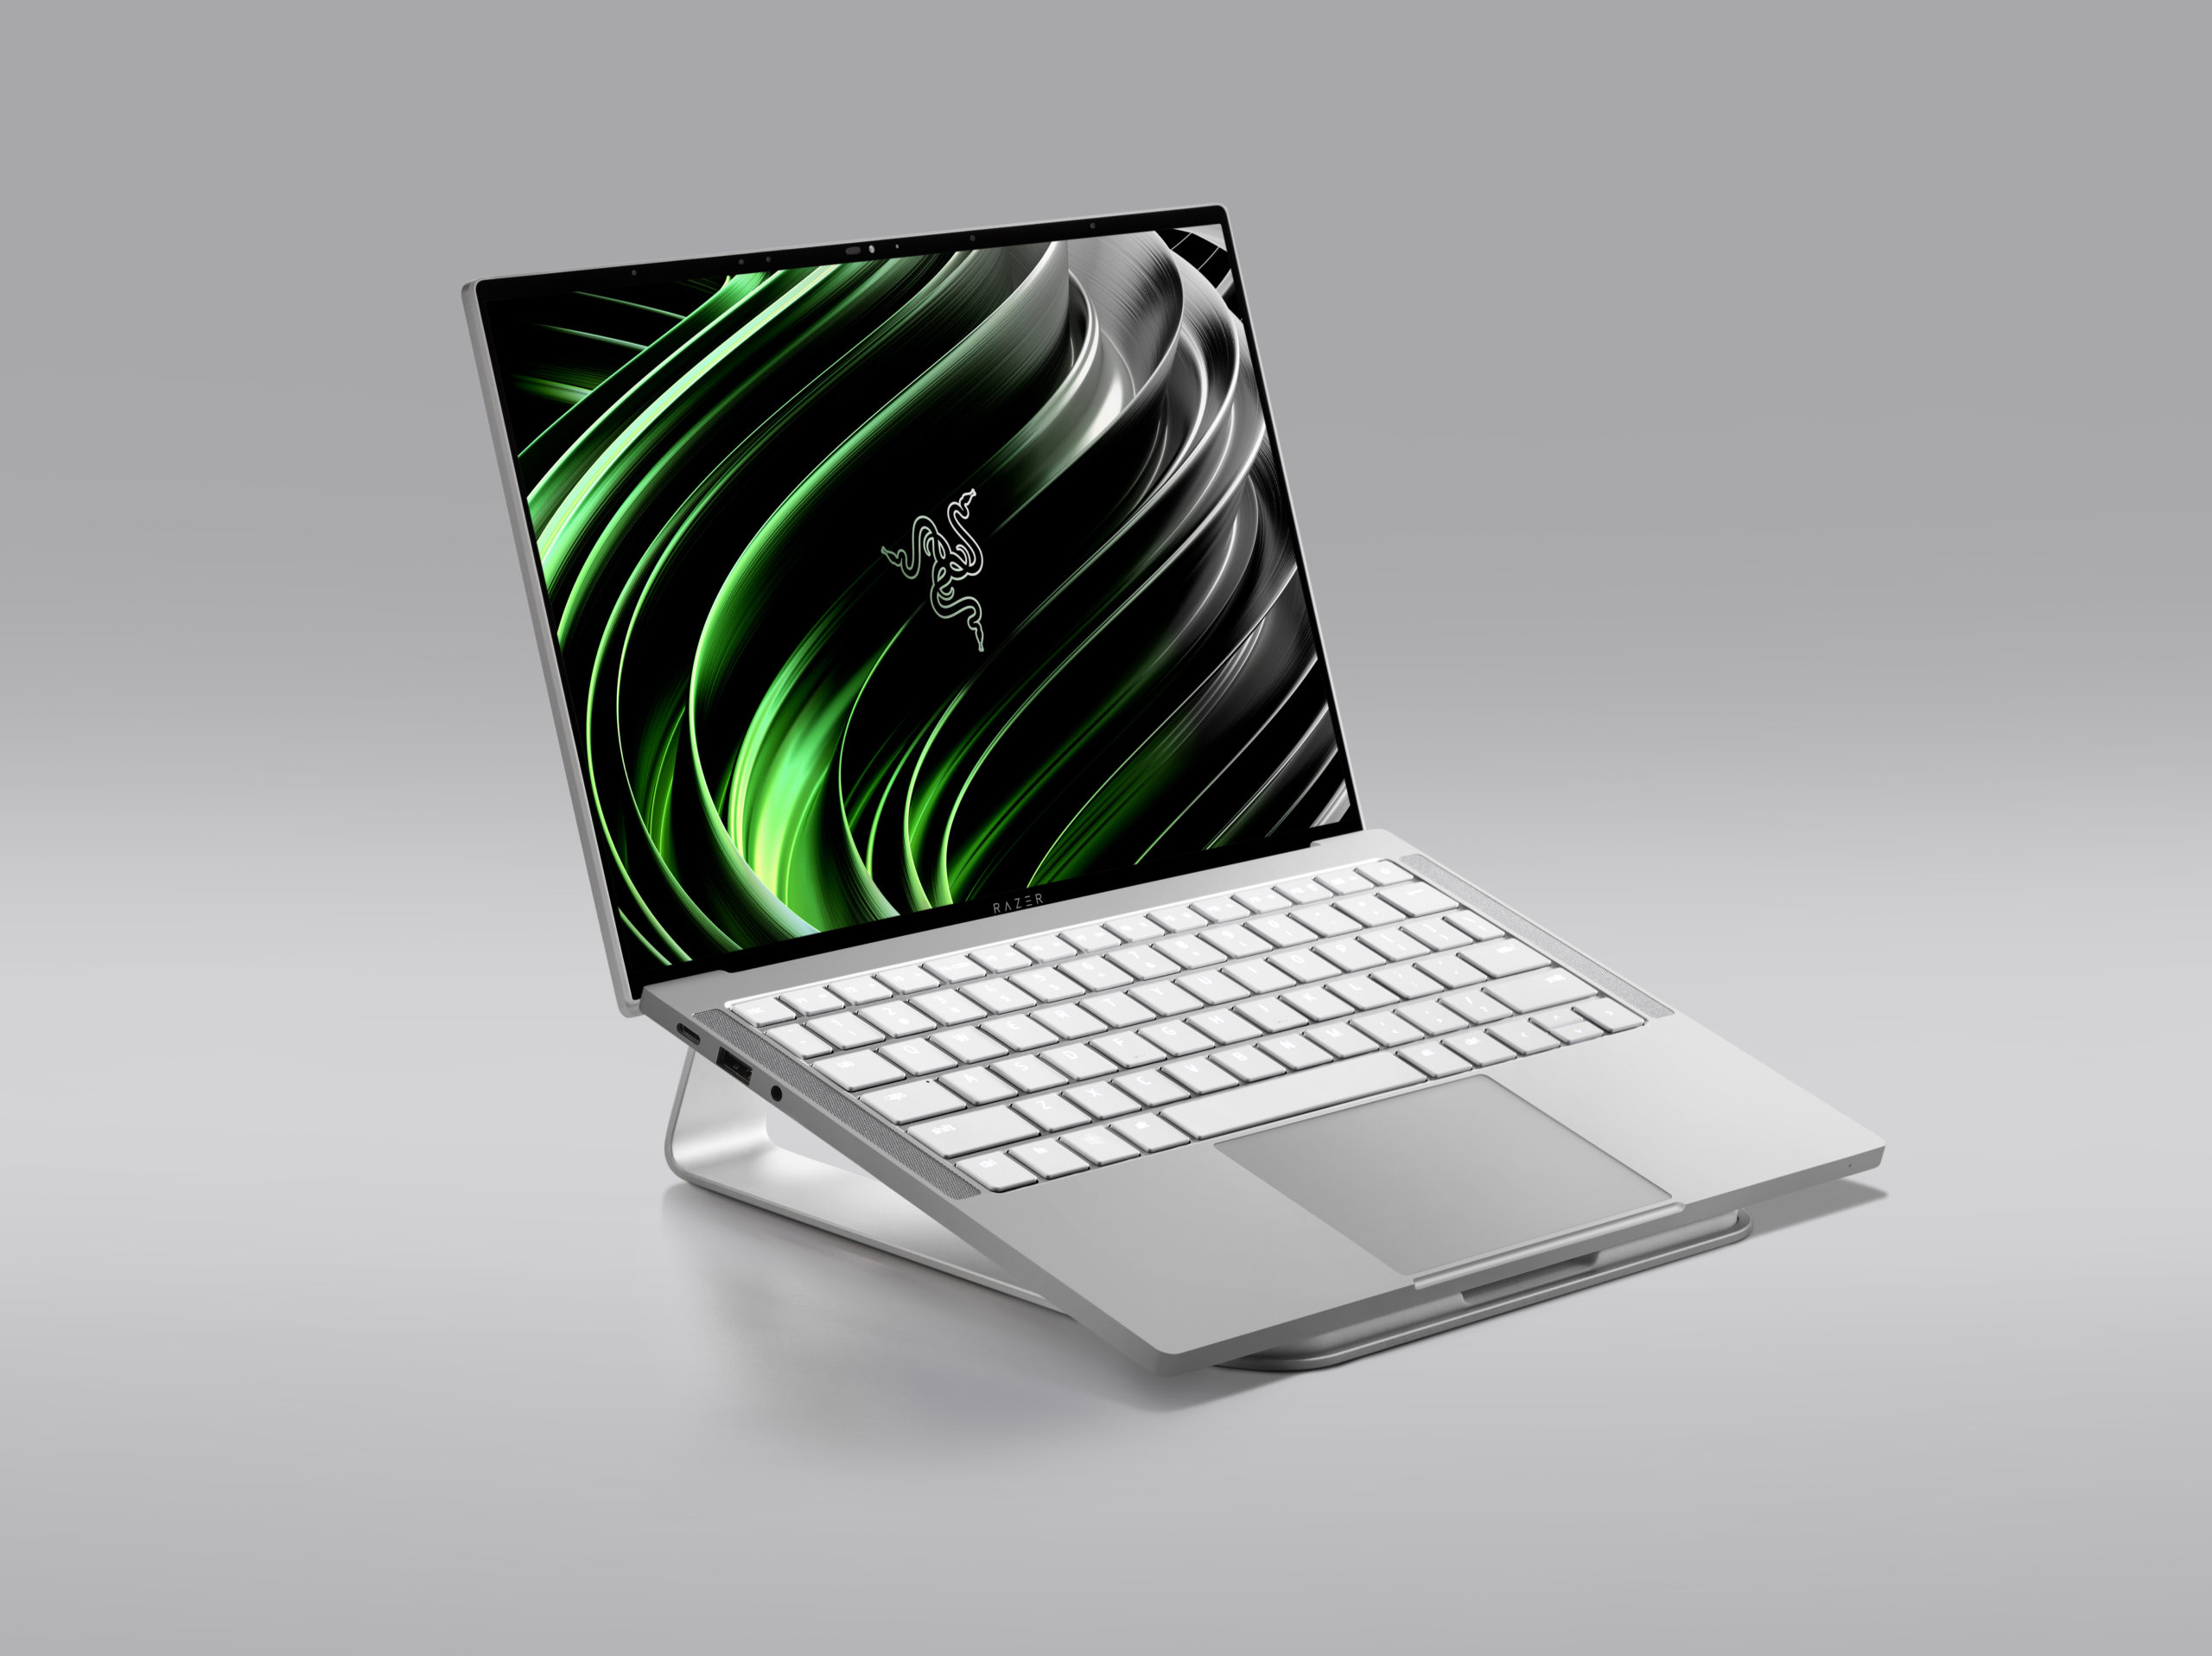 New Razer Book 13: Faster, more efficient and ultra-compact